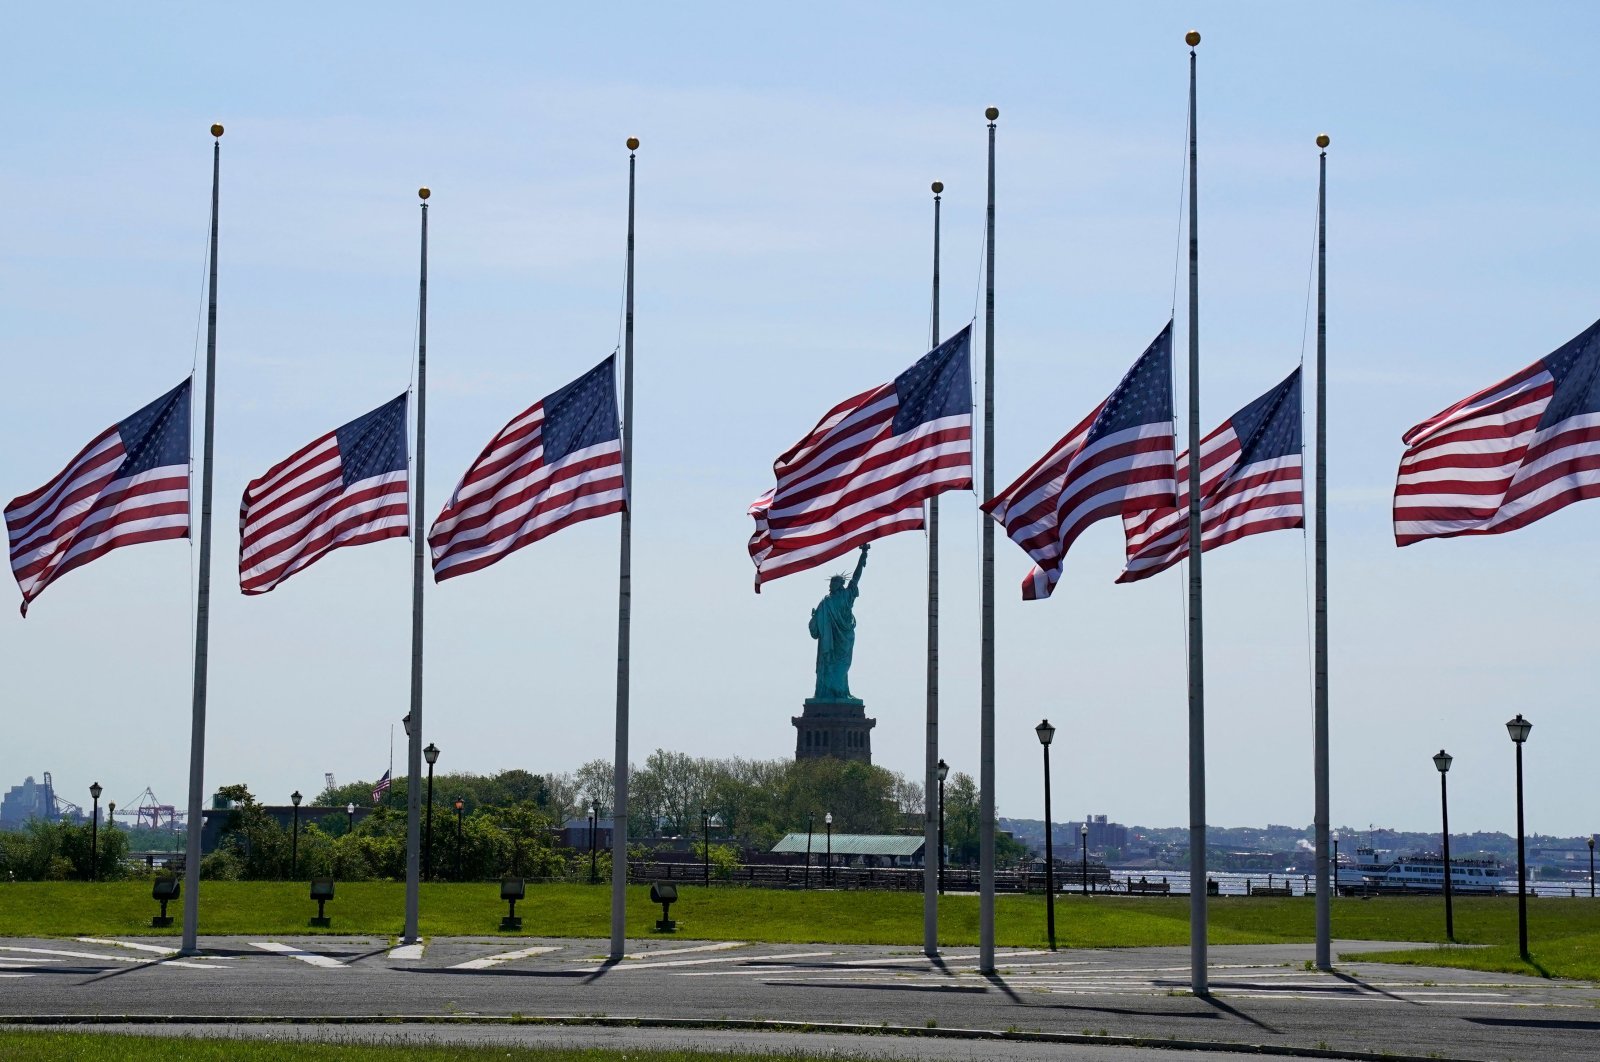 U.S. flags are seen flapping in the wind at half-staff across from the Statue of Liberty, New Jersey, U.S., May 25, 2022. (AFP Photo)